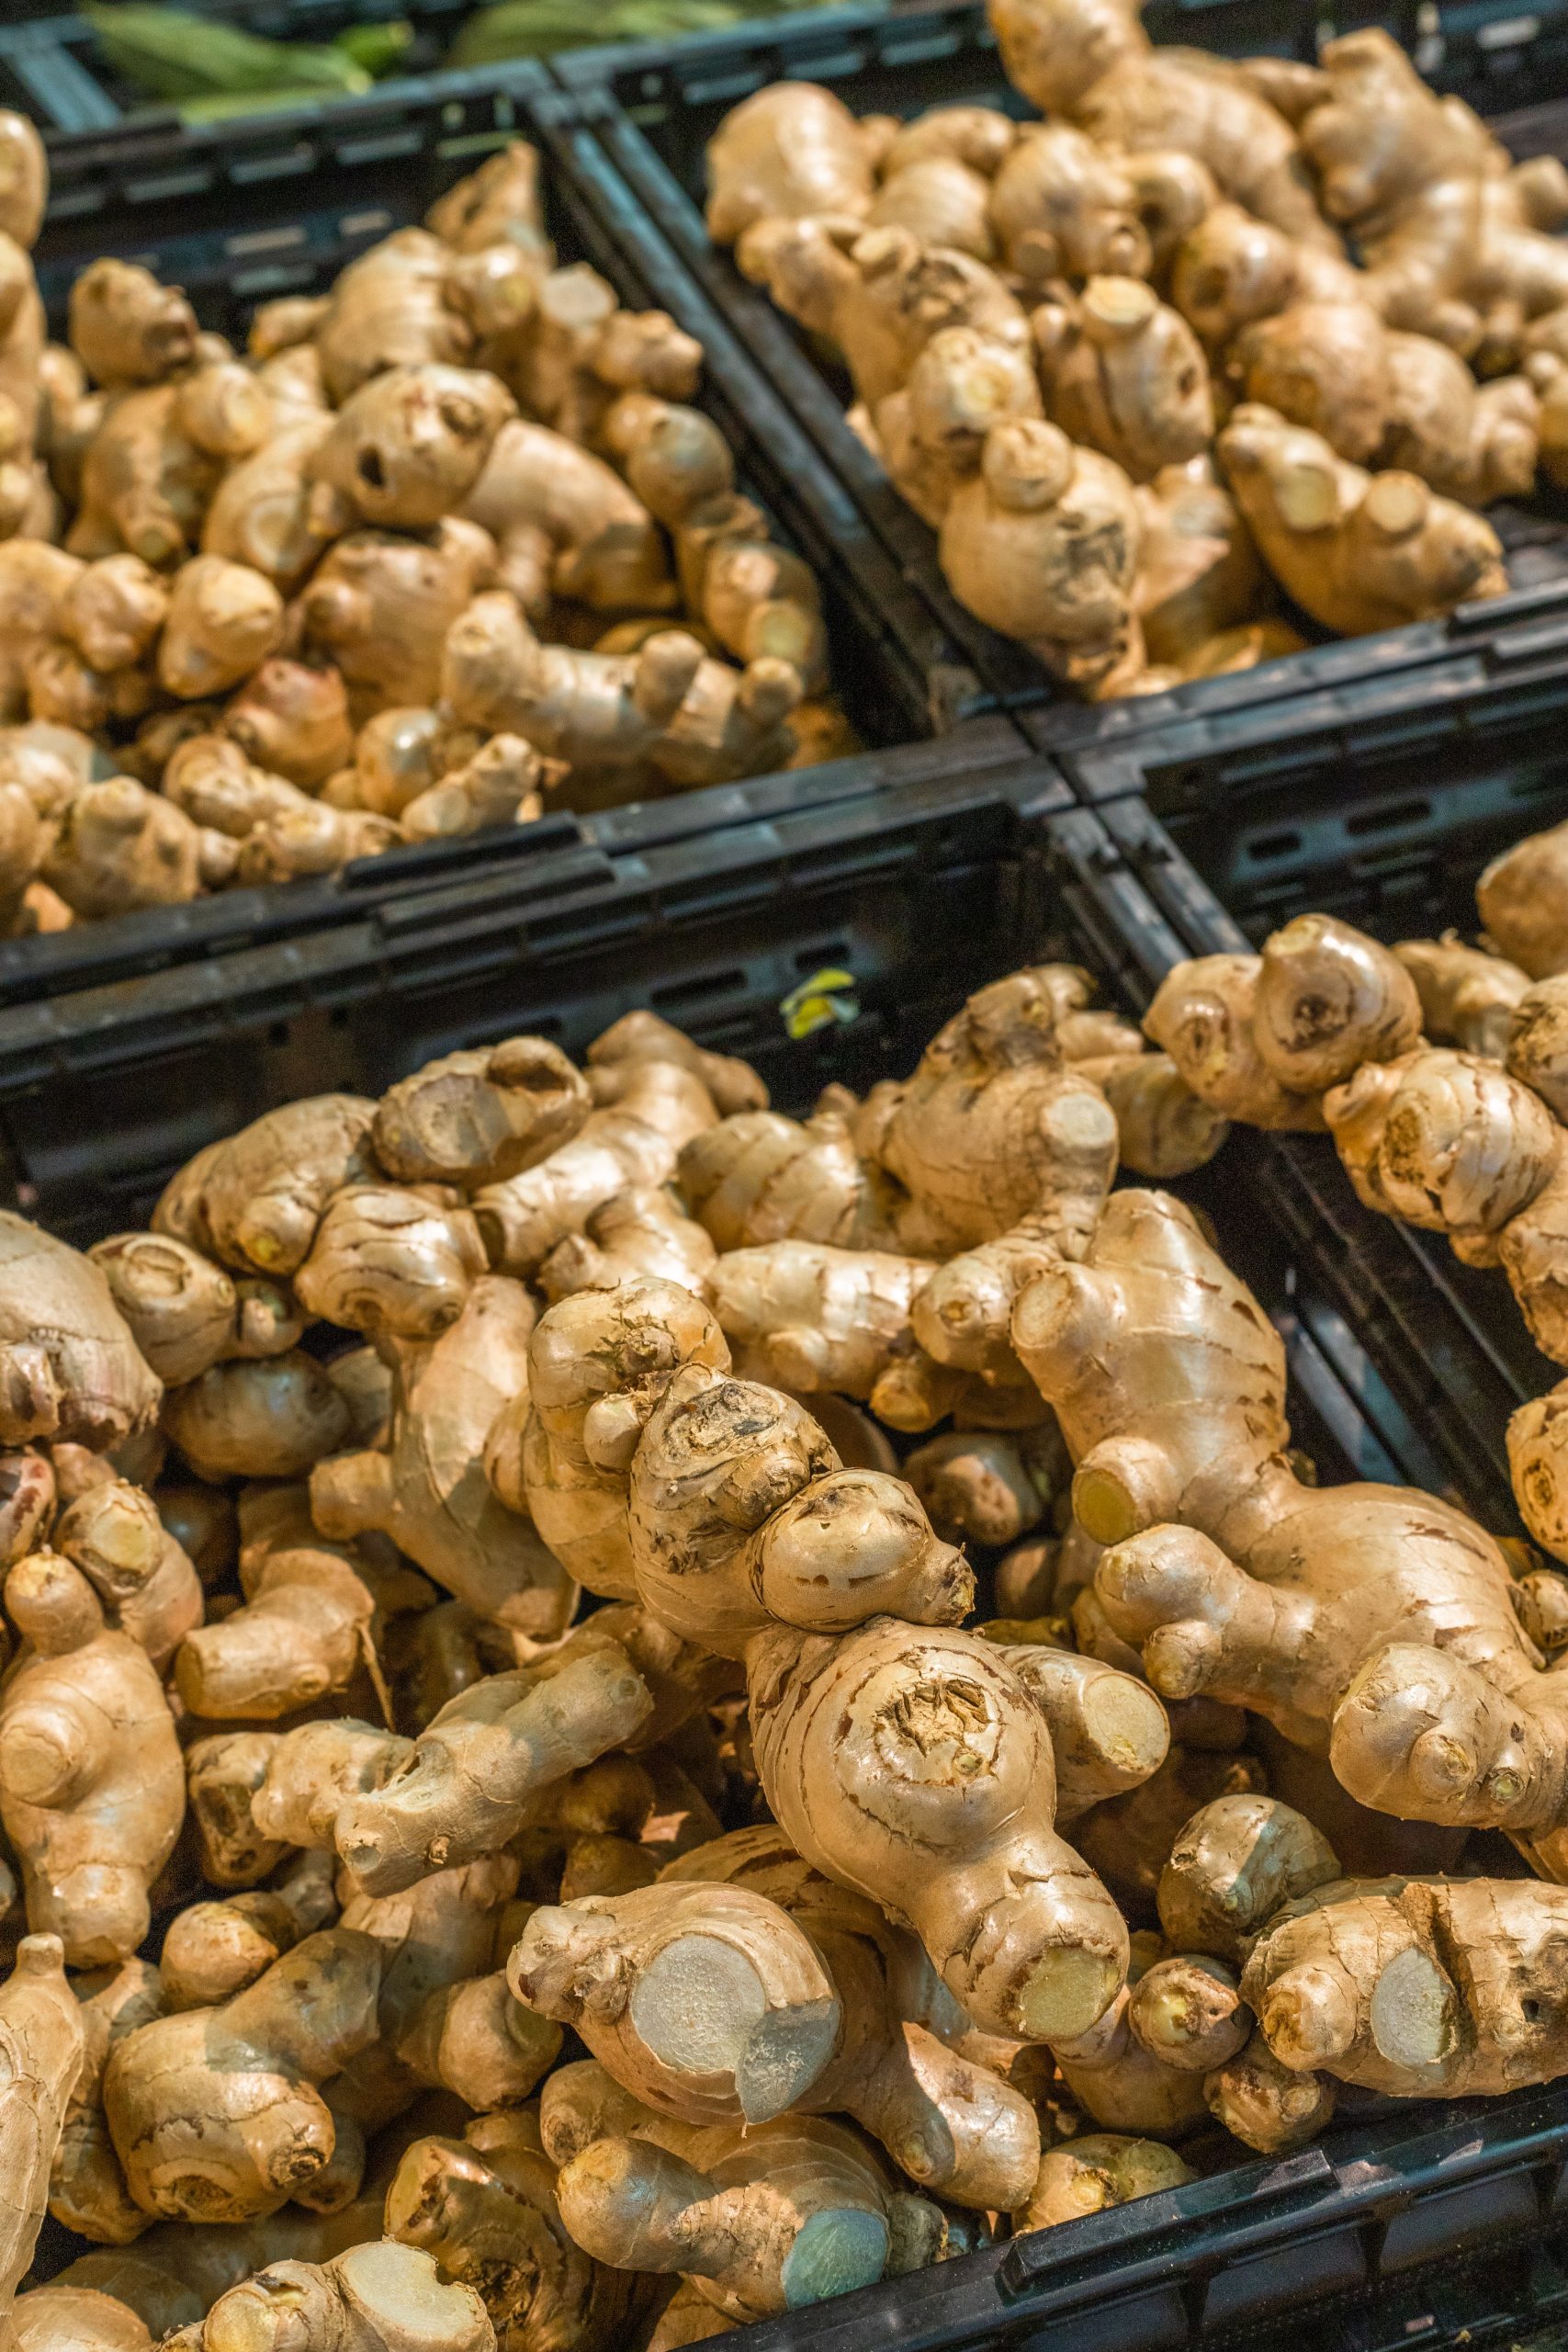 What Is Ginger A Root Or Stem?